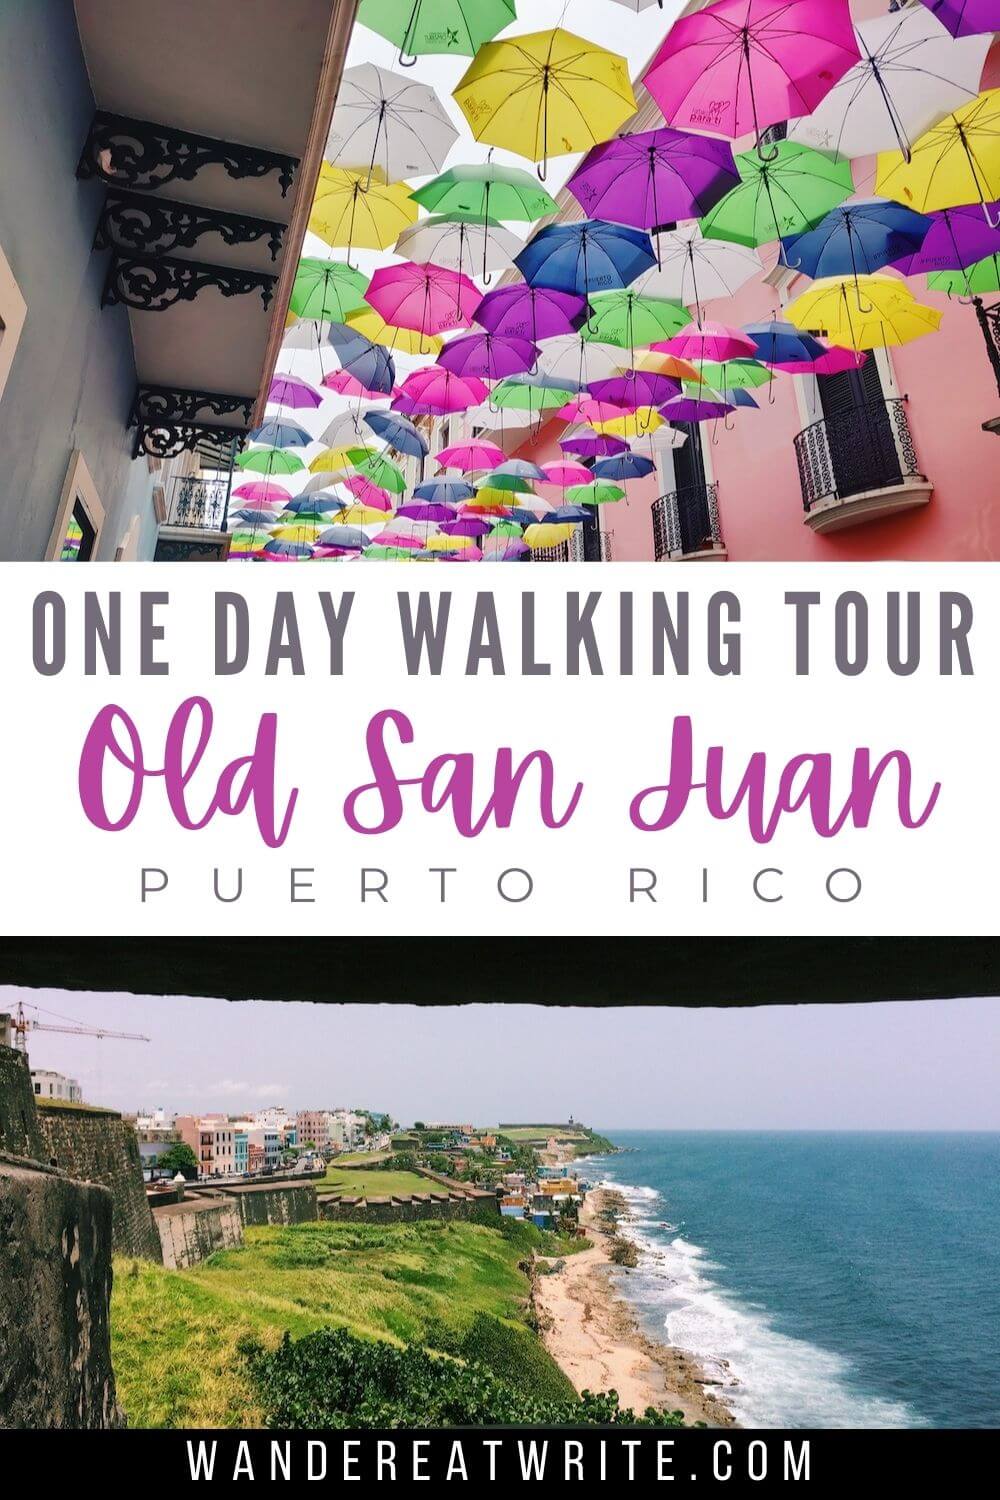 Text: One day Old San Juan Walking tour; top photo: colorful umbrellas; bottom photo: ocean, beach, and fortress